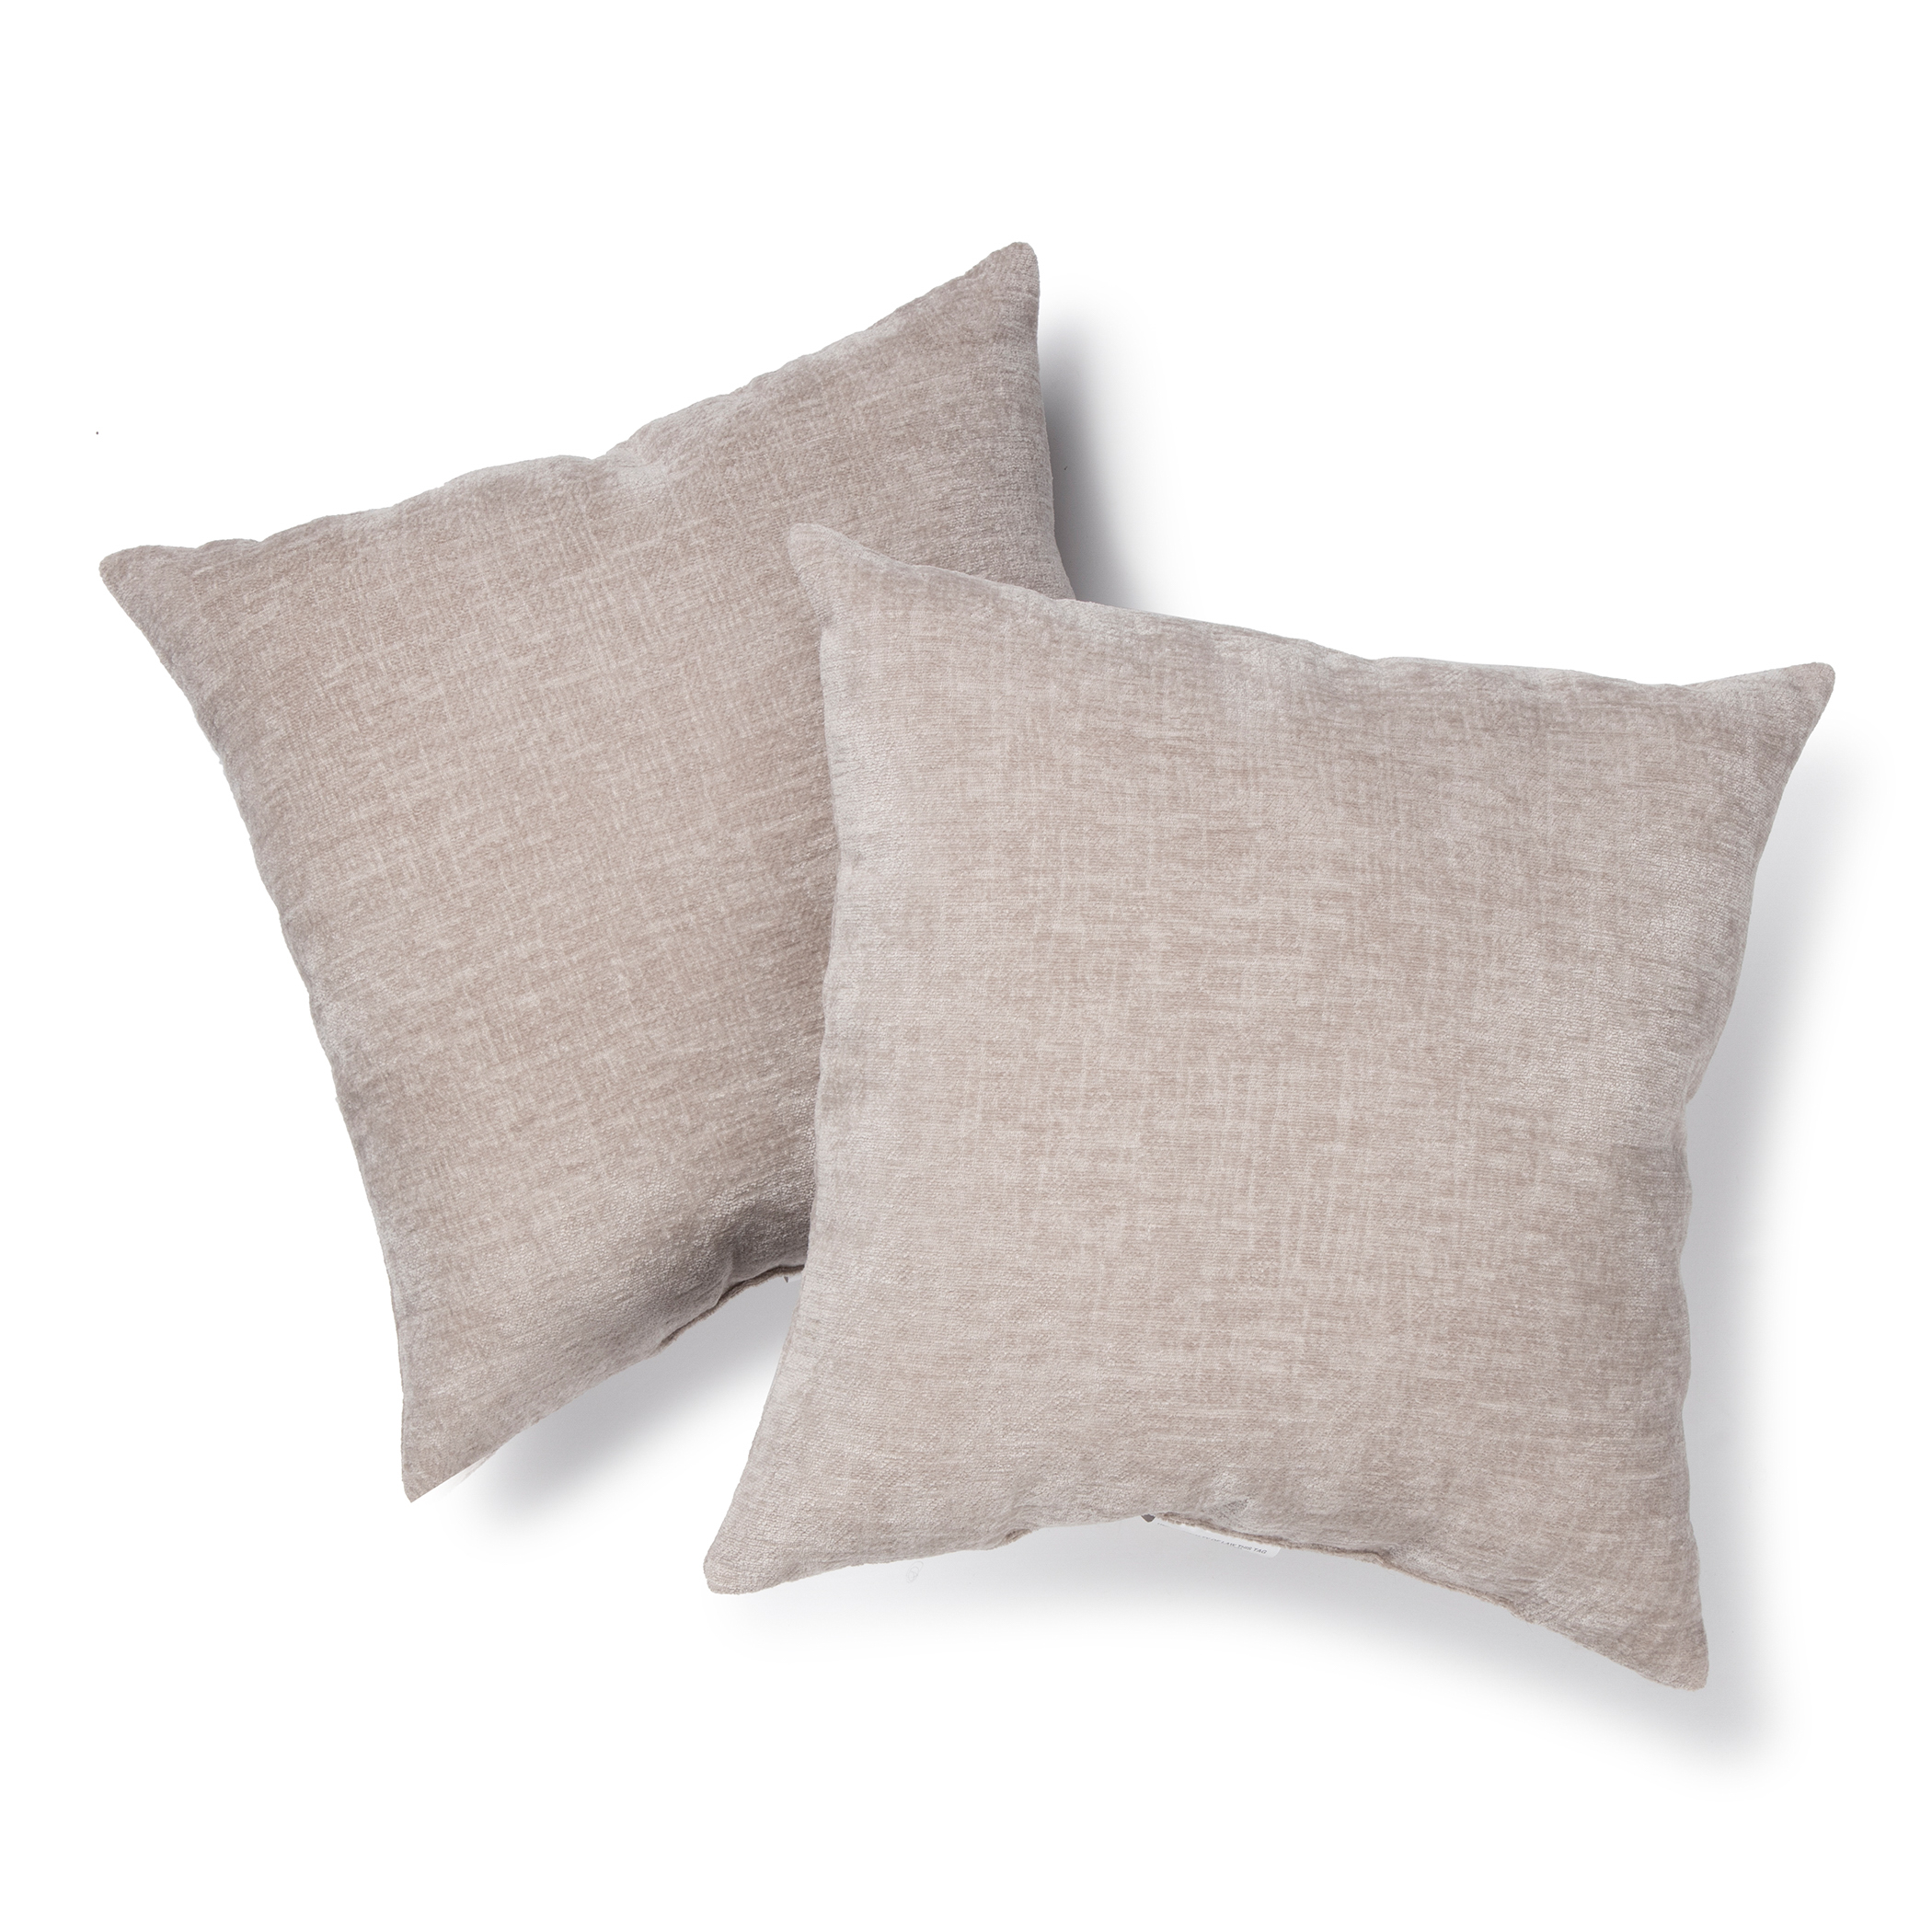 Mainstays Chenille Decorative Square Throw Pillow, 18" x 18", Gray Pumice, 2 Pack - image 3 of 5